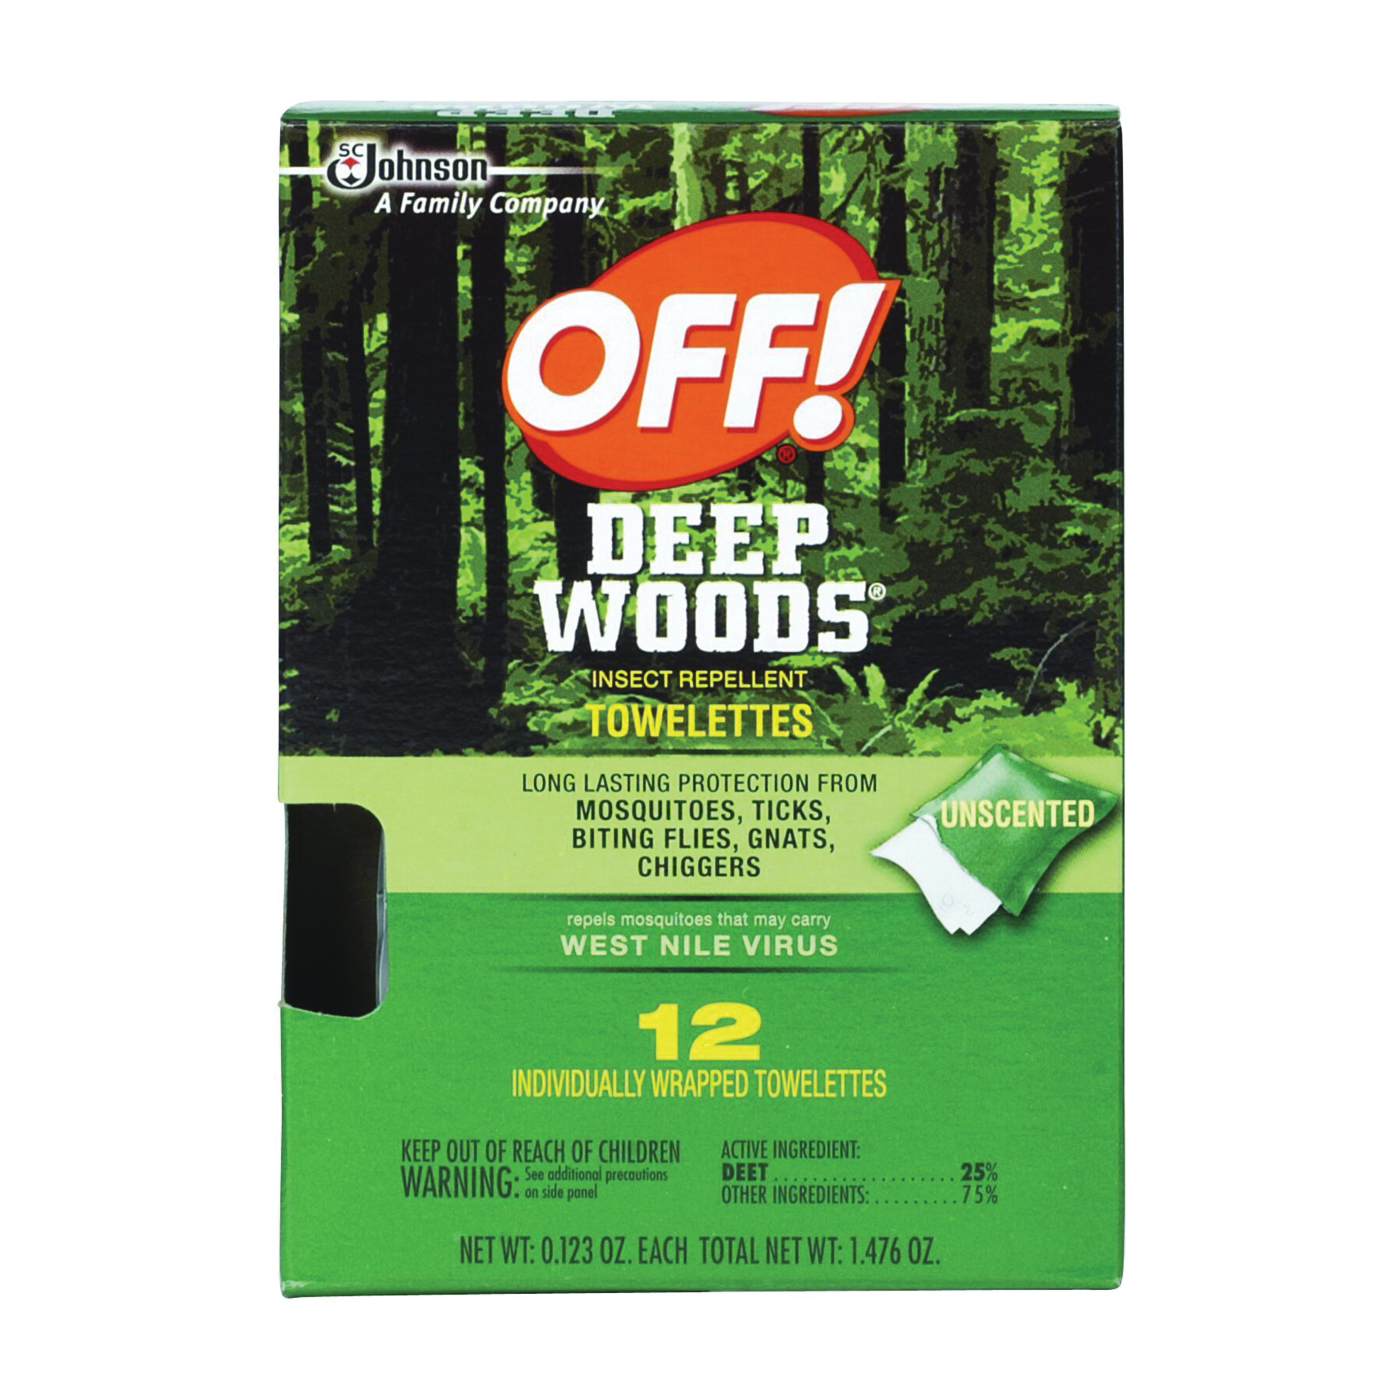 OFF! Deep Woods 54996 Insect Repellent Towelette, 12 CT Pack, Liquid, Clear/White, Alcohol